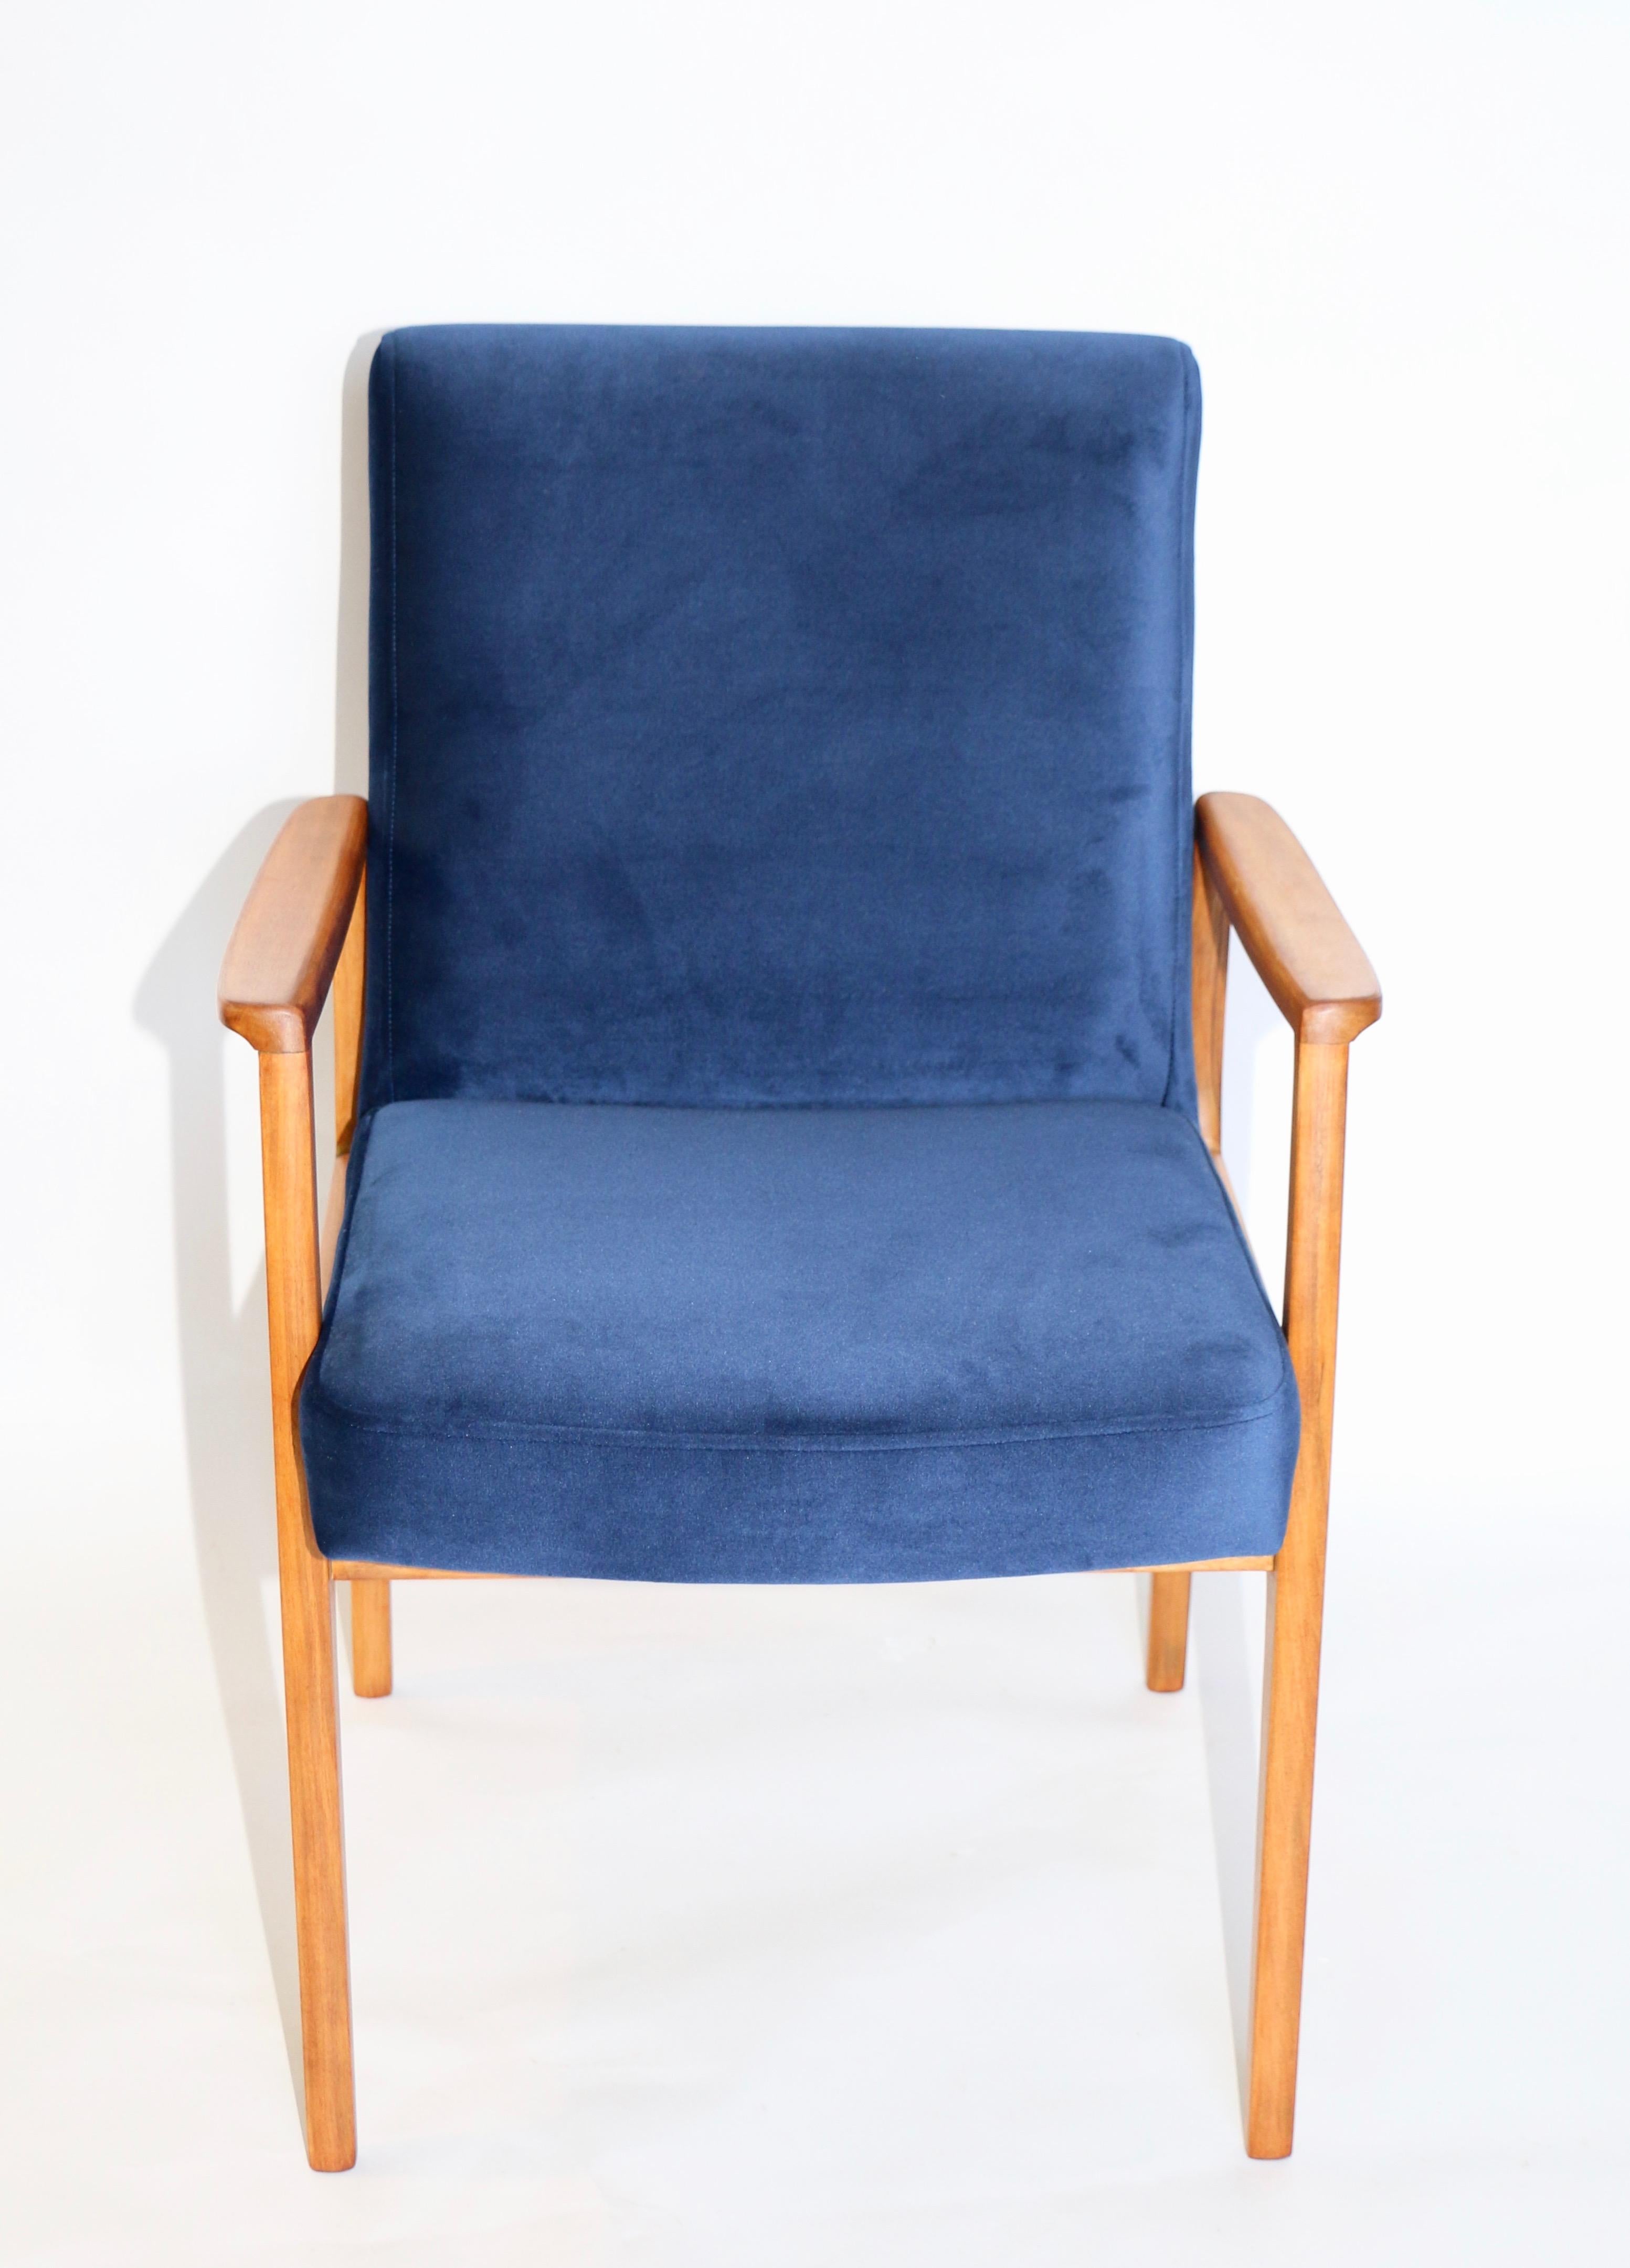 Woodwork Set of 4 Chairs in Blue Velvet from 20th Century